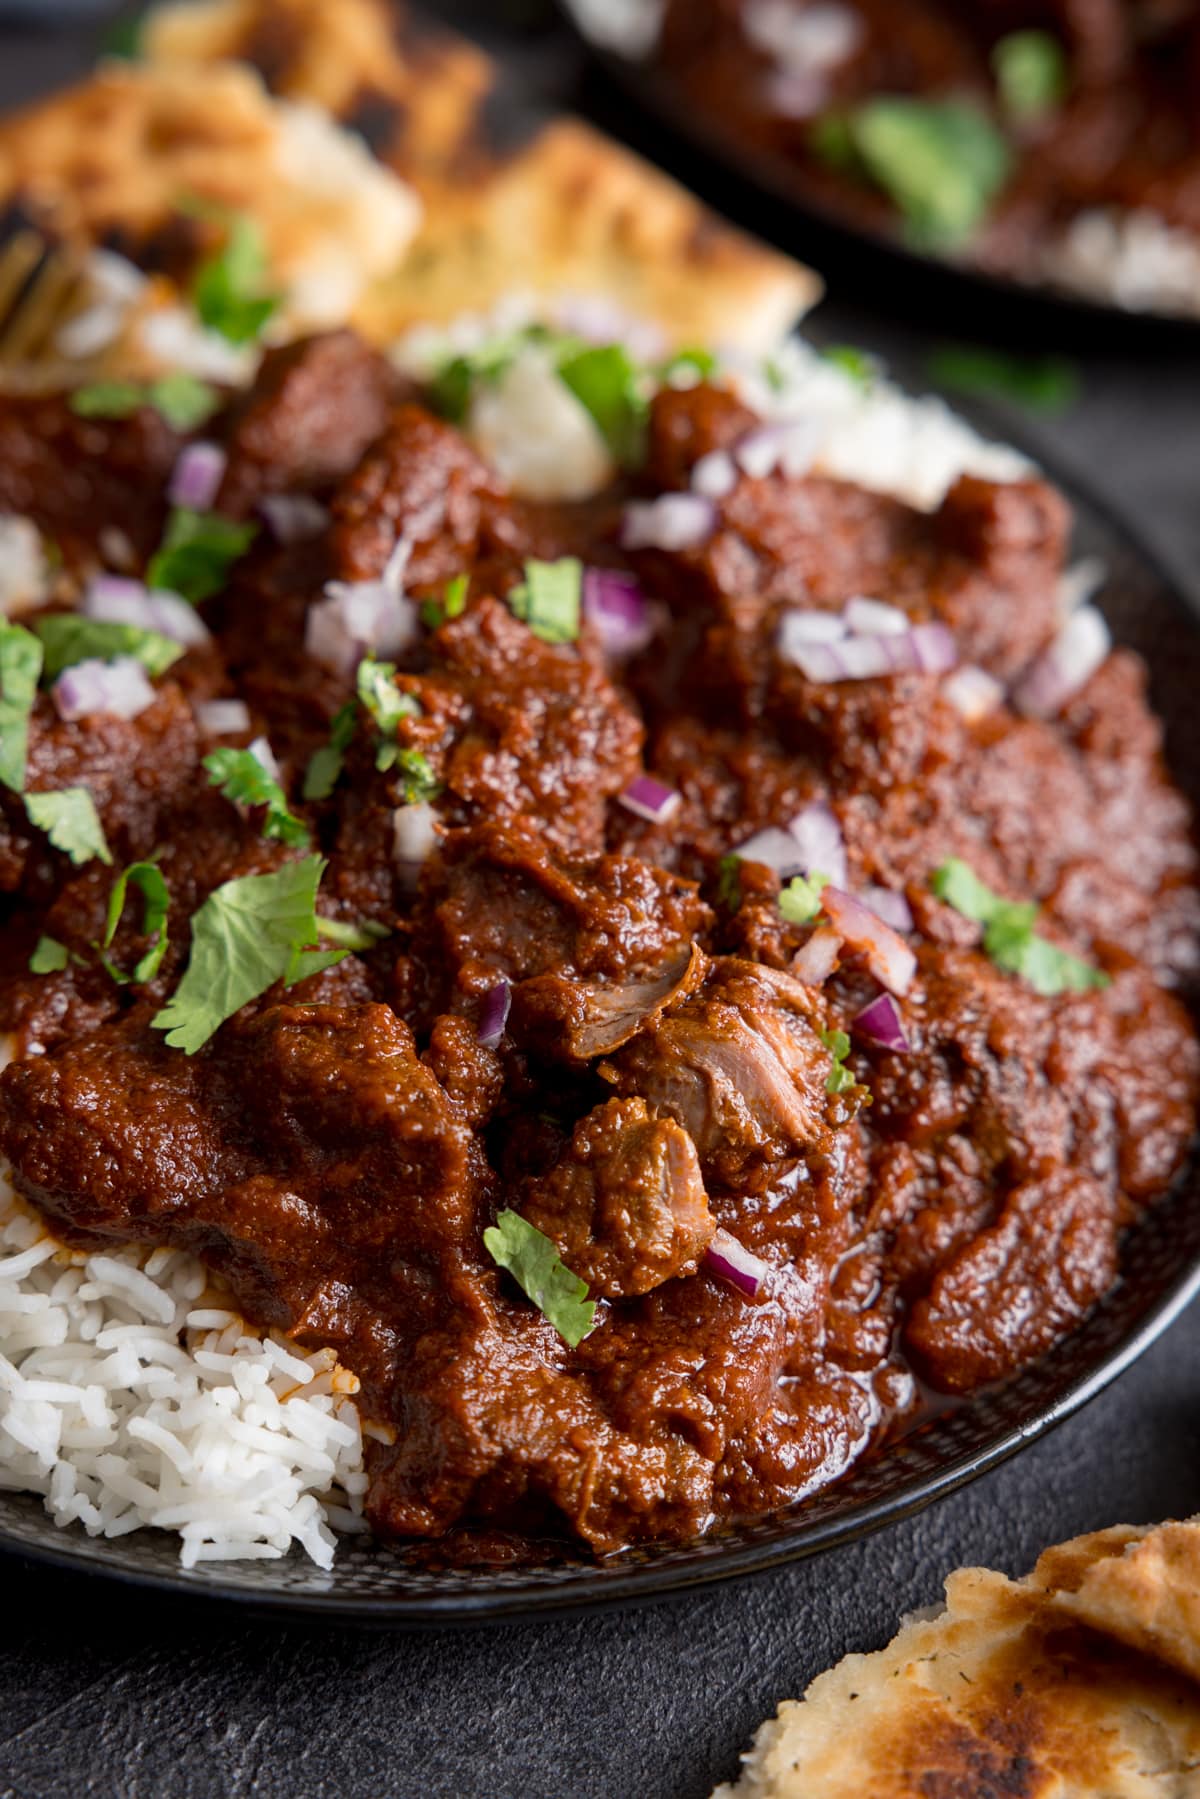 Close up image of slow cooked beef madras in a black bowl with rice and pieces of naan bread. There is coriander (cilantro) sprinkled on top. The bowl is on a dark surface.